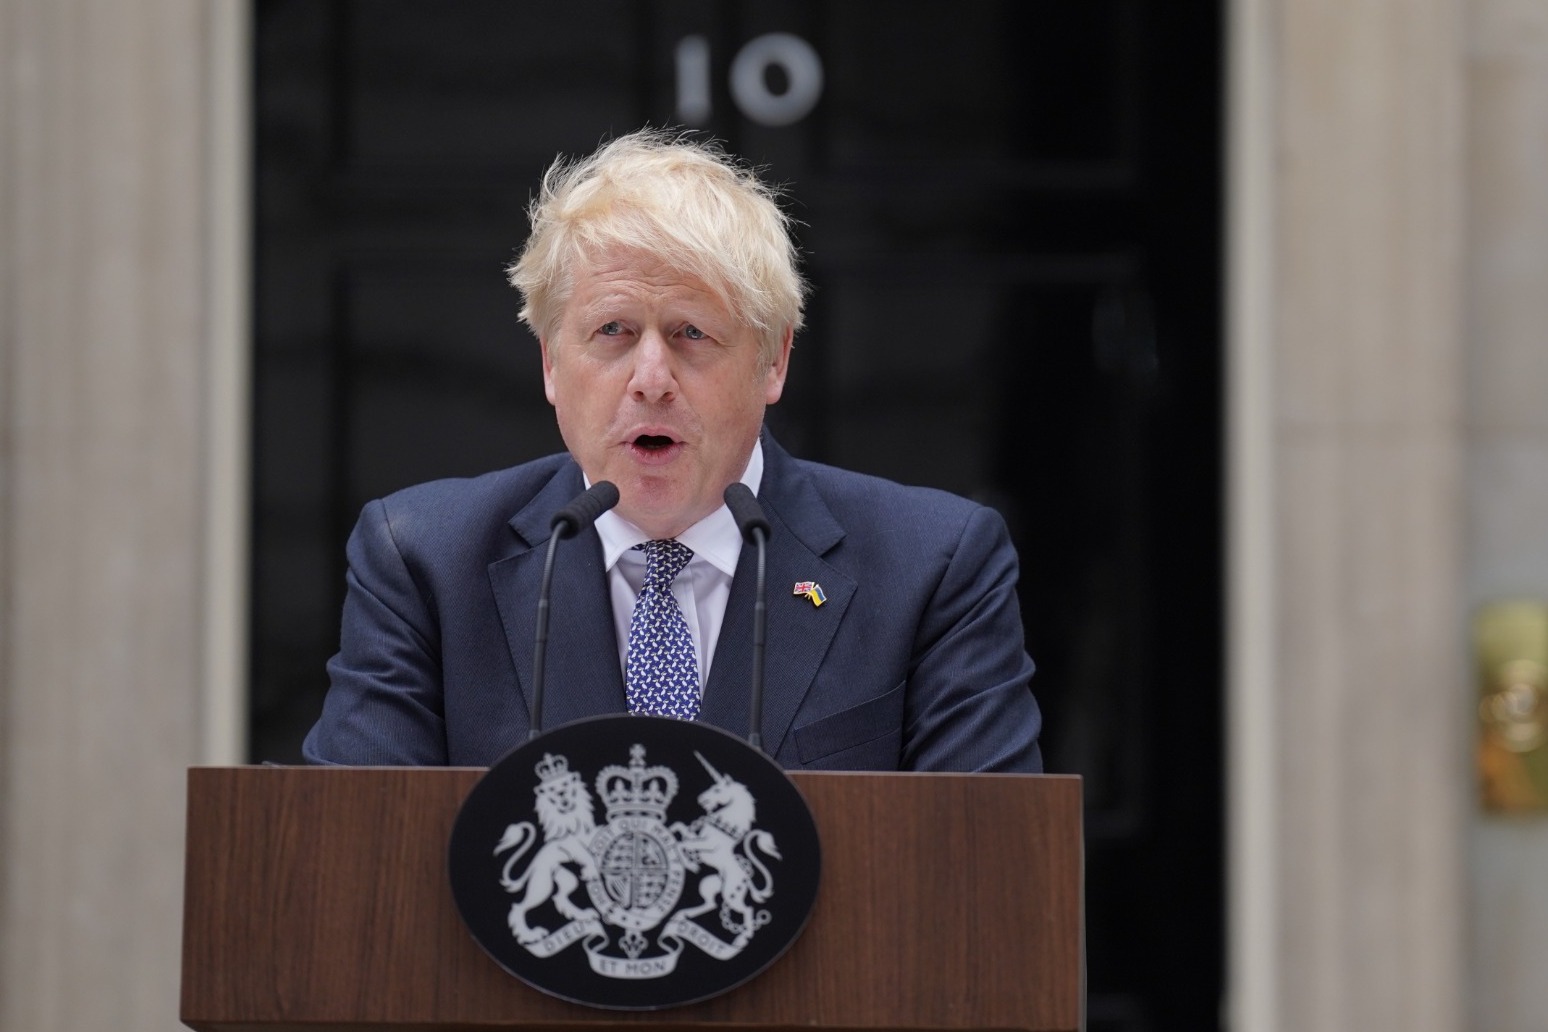 ‘Them’s the breaks’: Boris Johnson’s ‘regret’ as he quits as Tory leader 